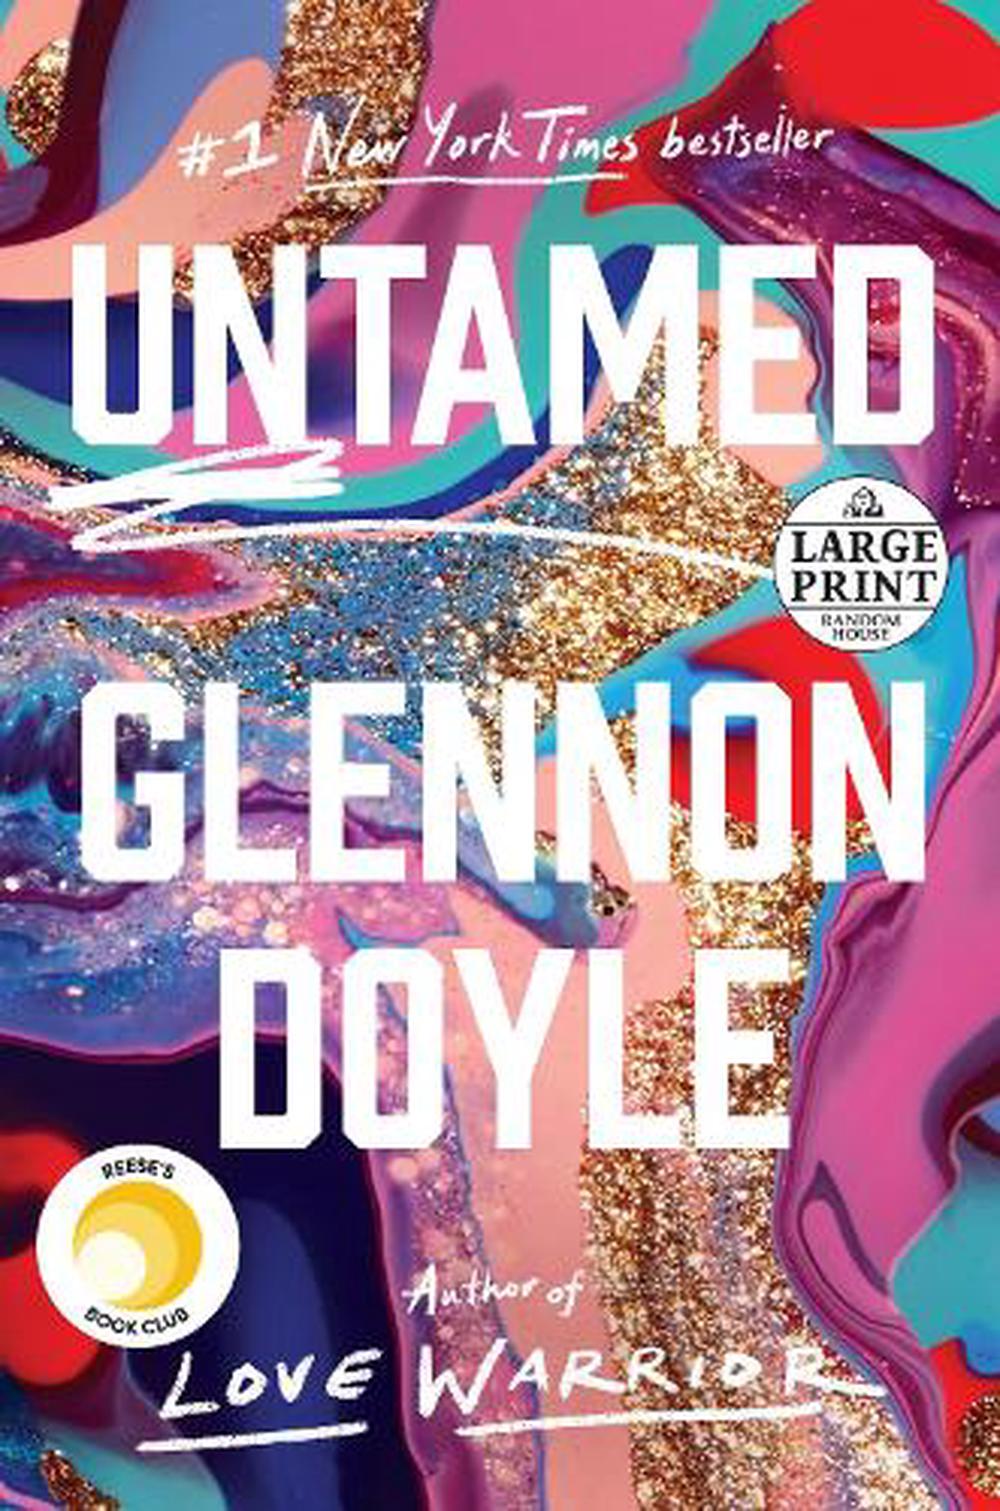 book review untamed by glennon doyle